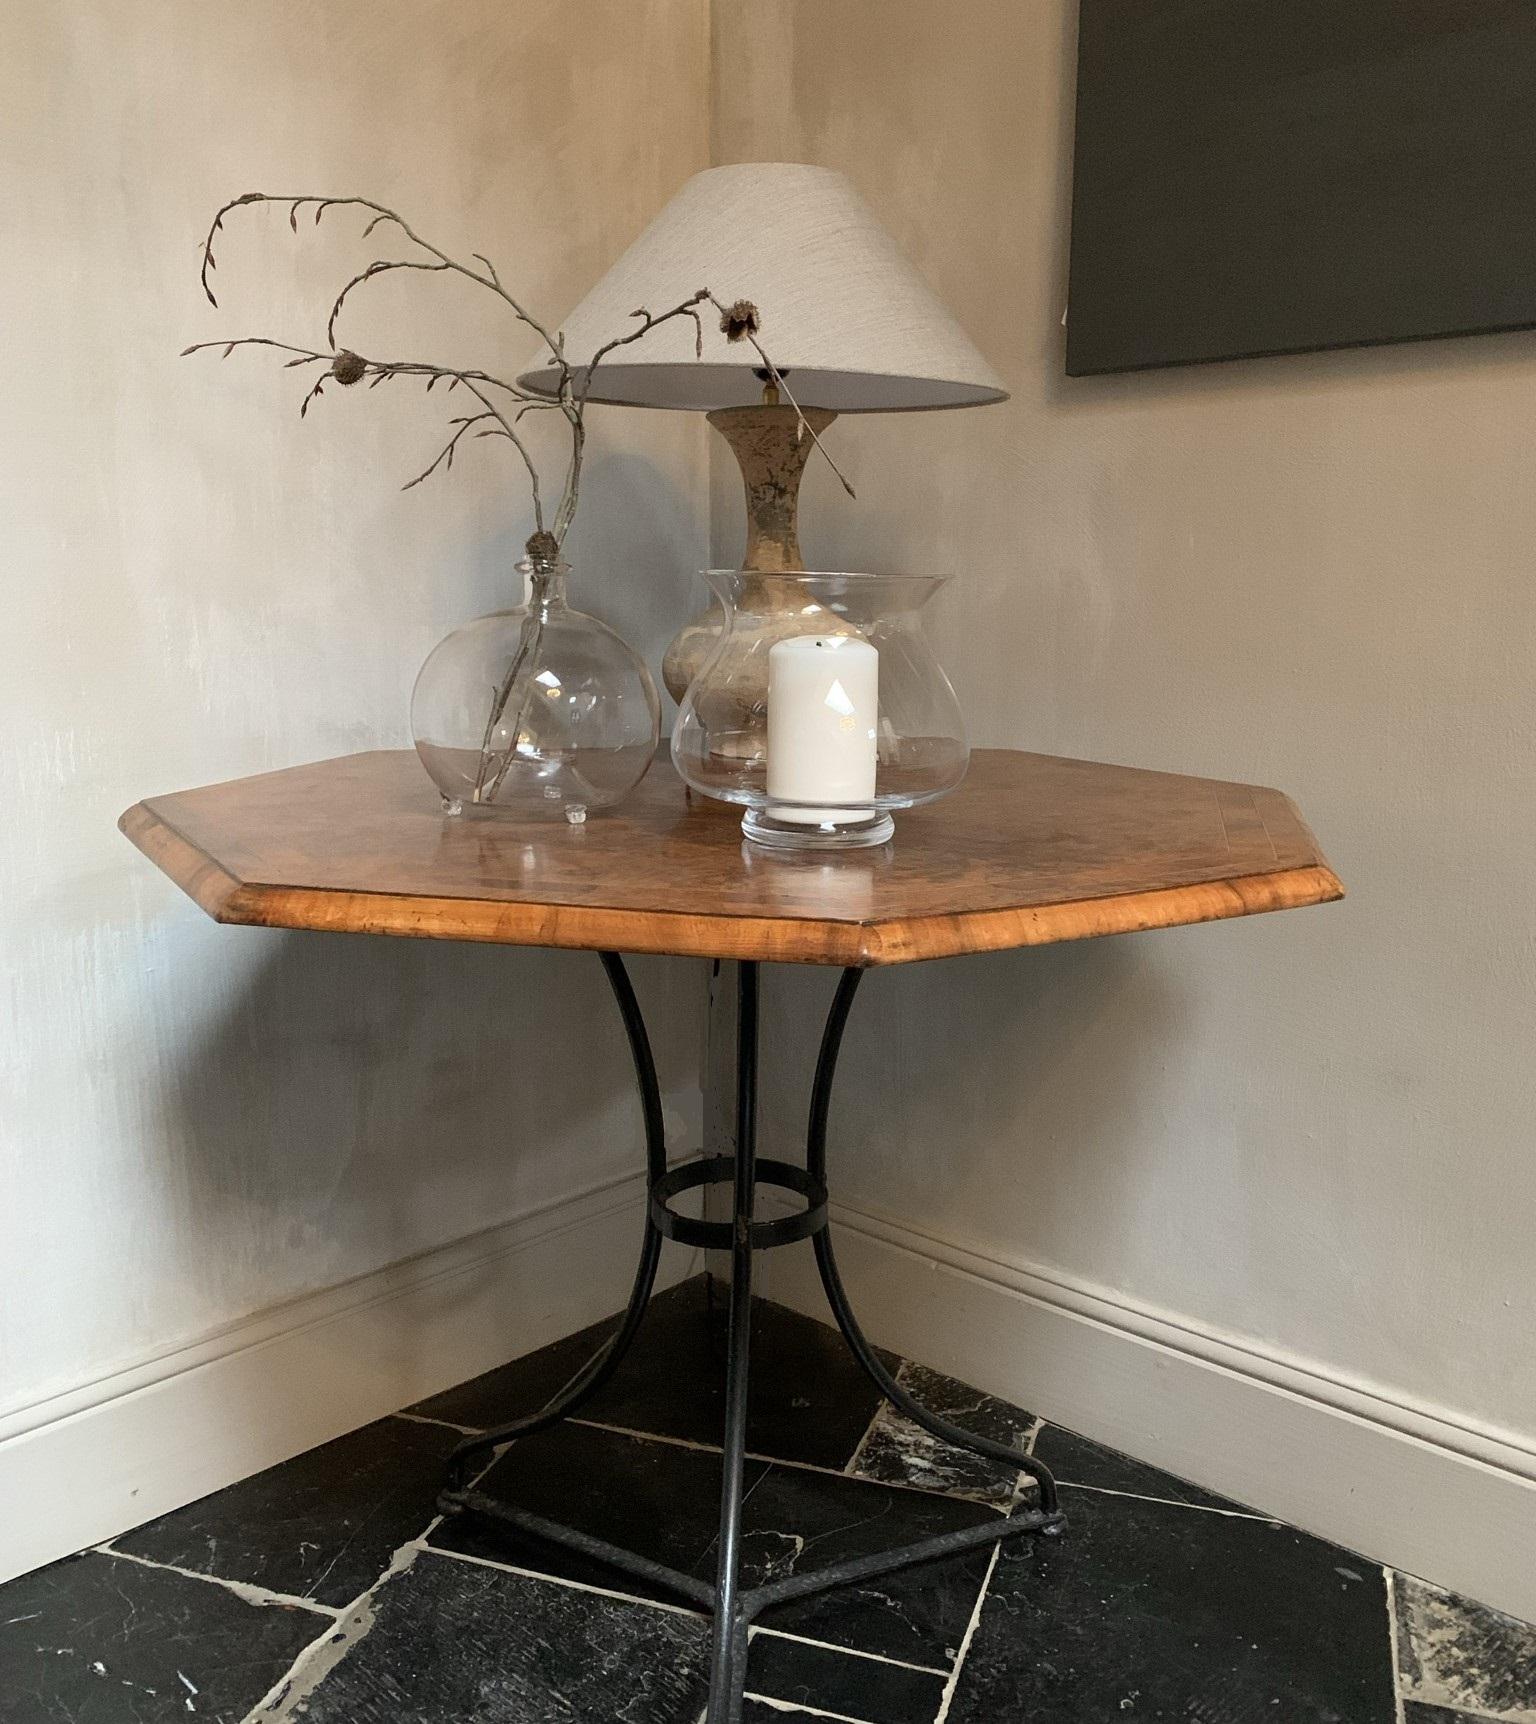 This table was, probably in the early 20th century, composed of the base of a bistro table and a 19th century octaganal top of great quality. The marriage is a good match and both complement eachother beautifully. Recycling is nothing new.